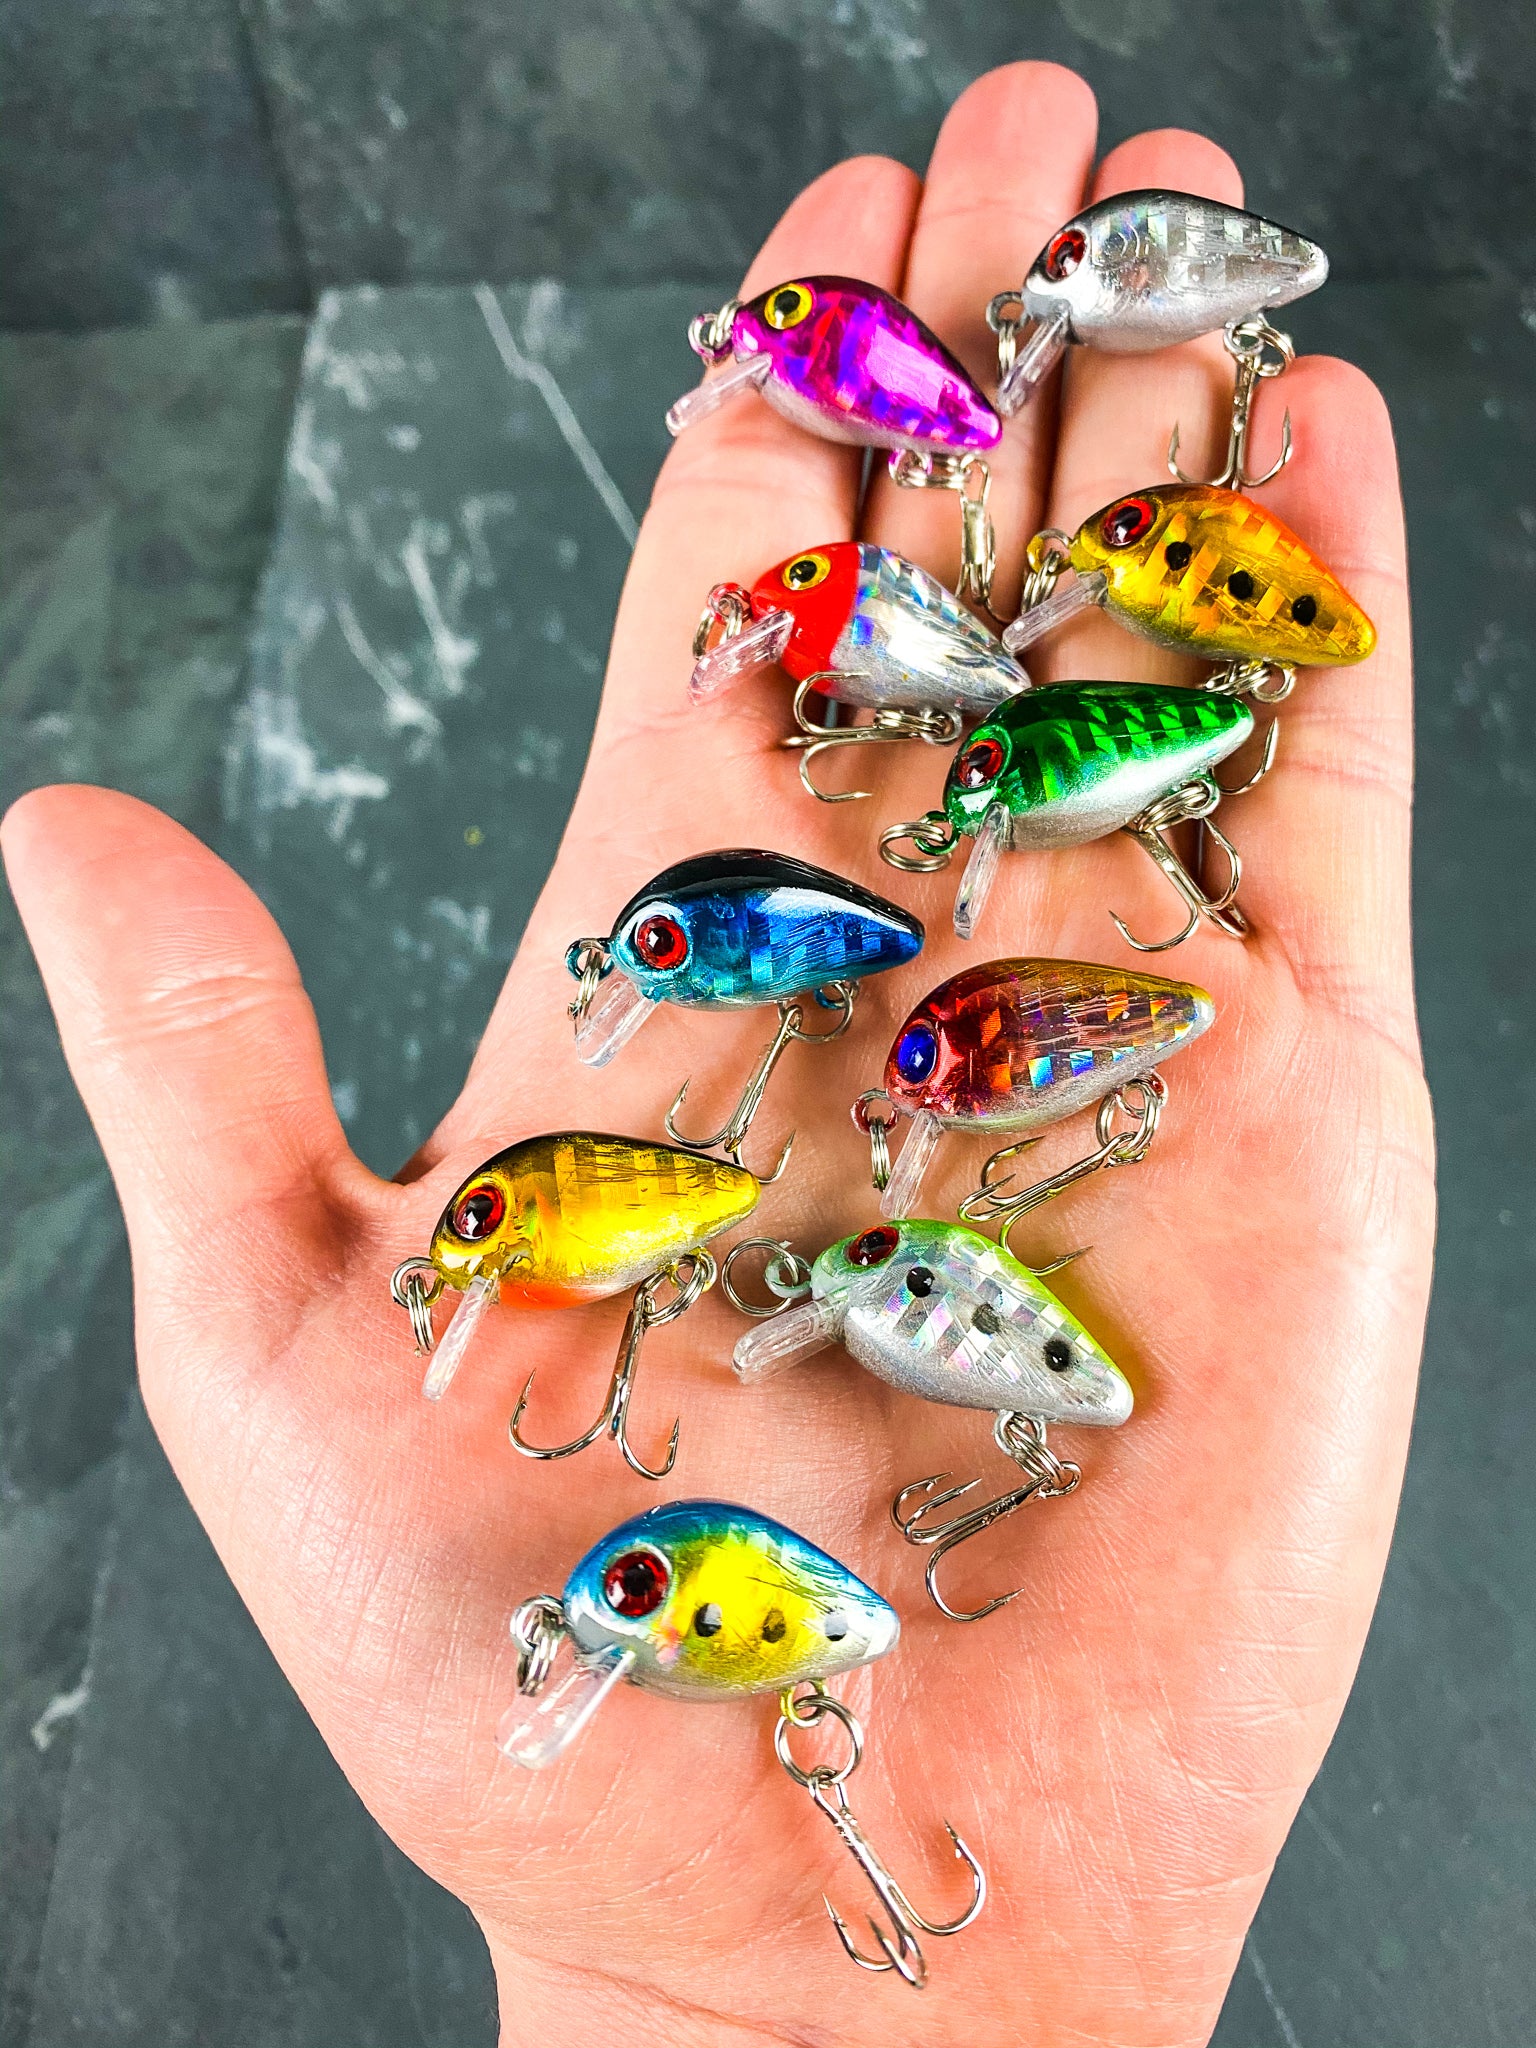 Running Mini Crankbaits for Trout in the Ozarks - Fishing Tackle